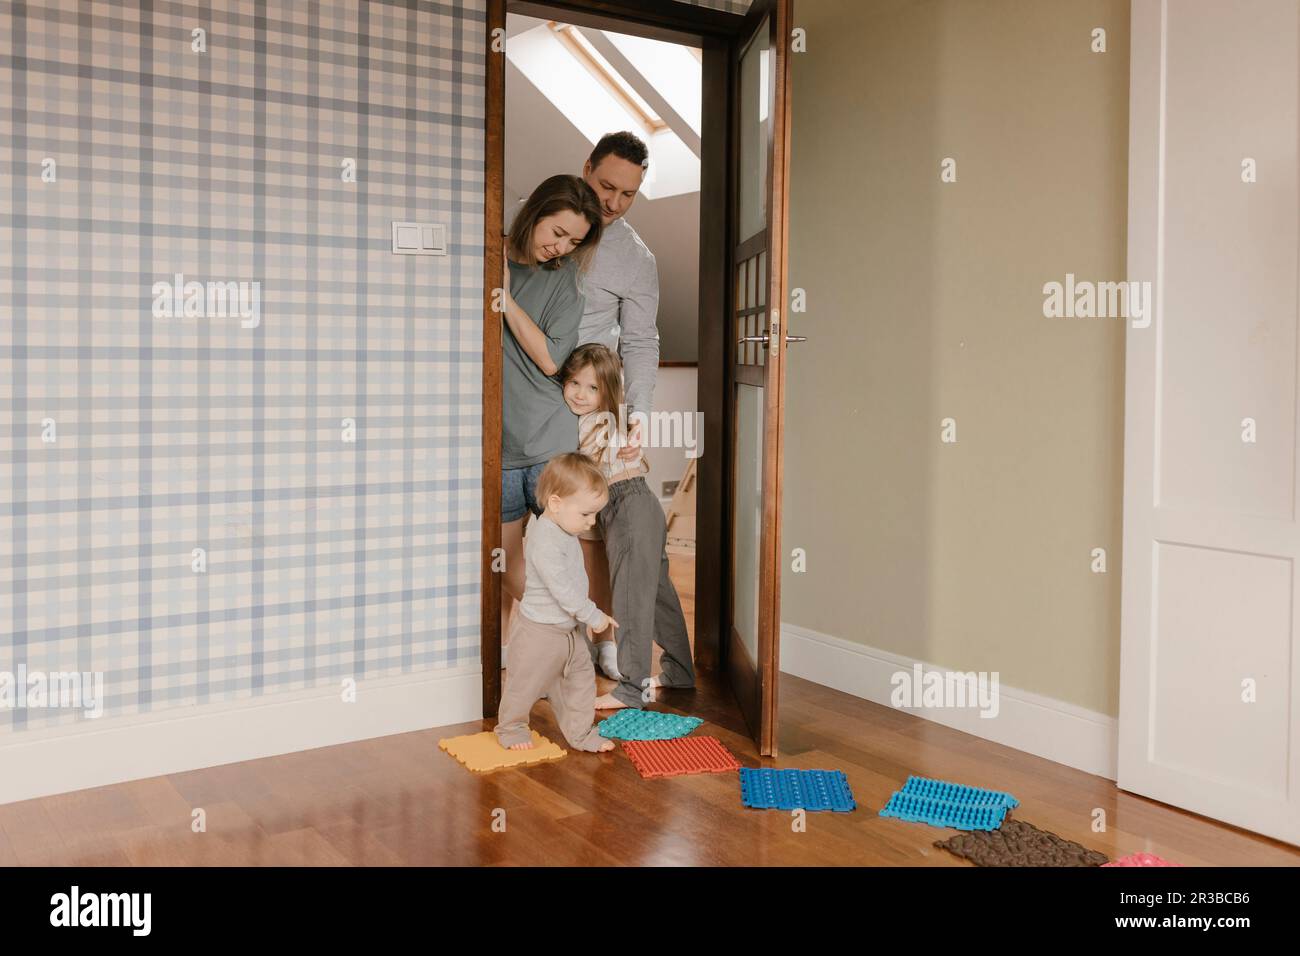 Family spending leisure time together at home Stock Photo